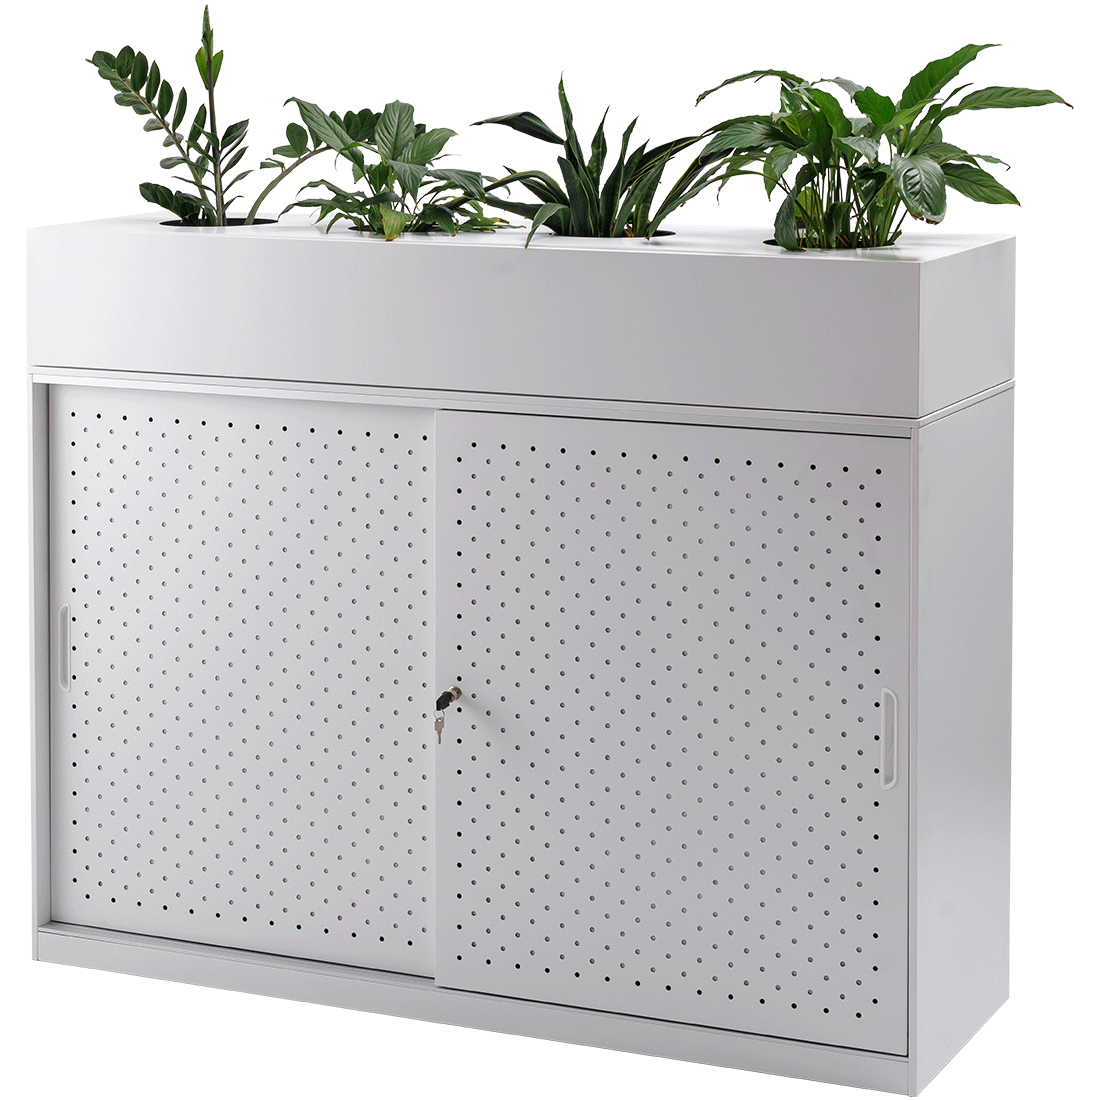 Cupboard Planter box for Perforated Cupboard